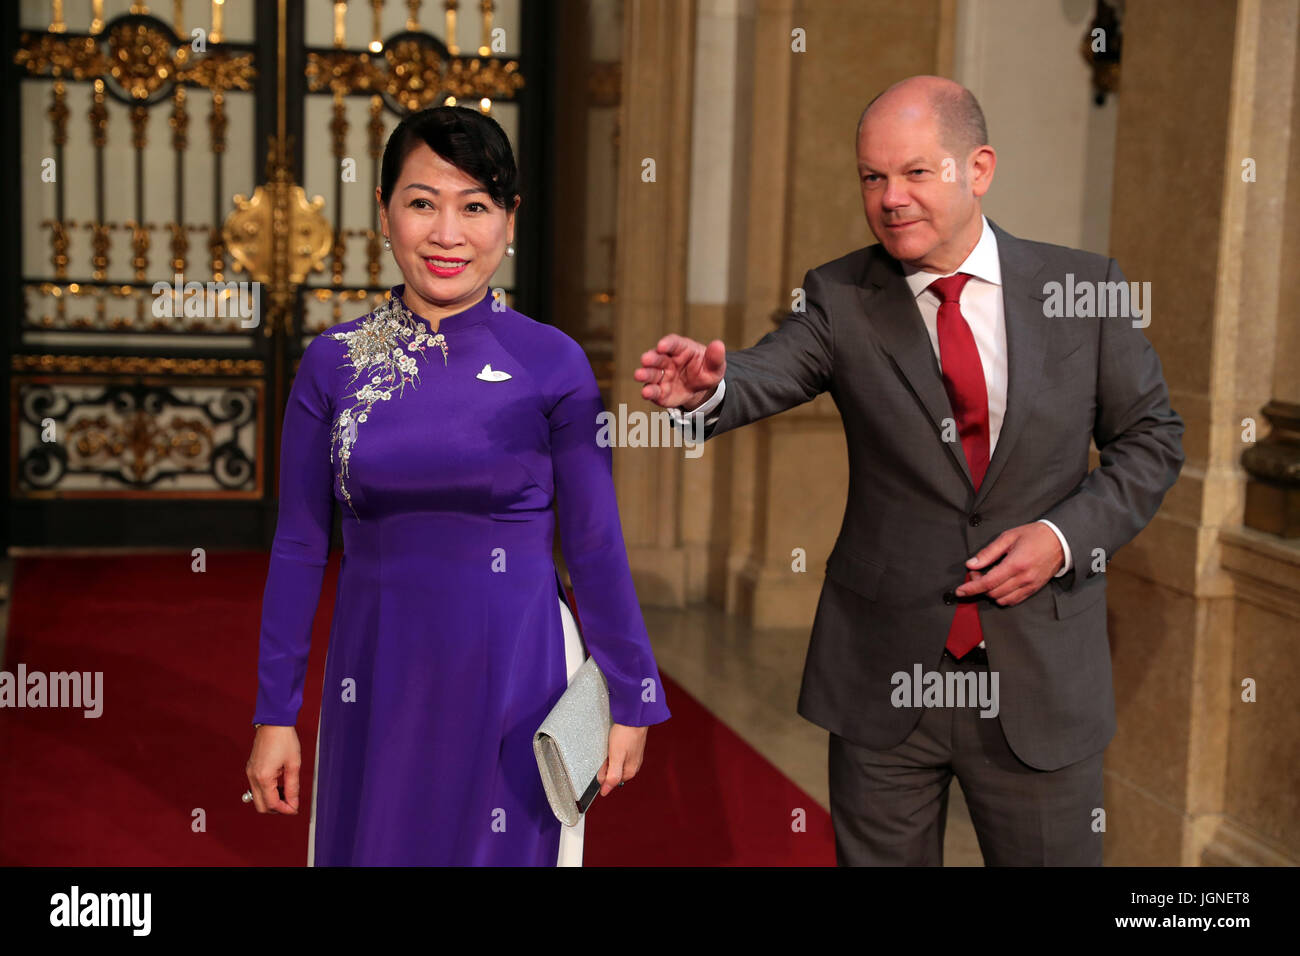 Olaf Scholz, the mayor of Hamburg, greets Nguyen Thi Hien, the wife of the Vietnamese president, during a G20 summit partners' programme event  in the city hall in Hamburg, Germany, 8 July 2017. Photo: Jens Büttner/dpa-Zentralbild/dpa Stock Photo